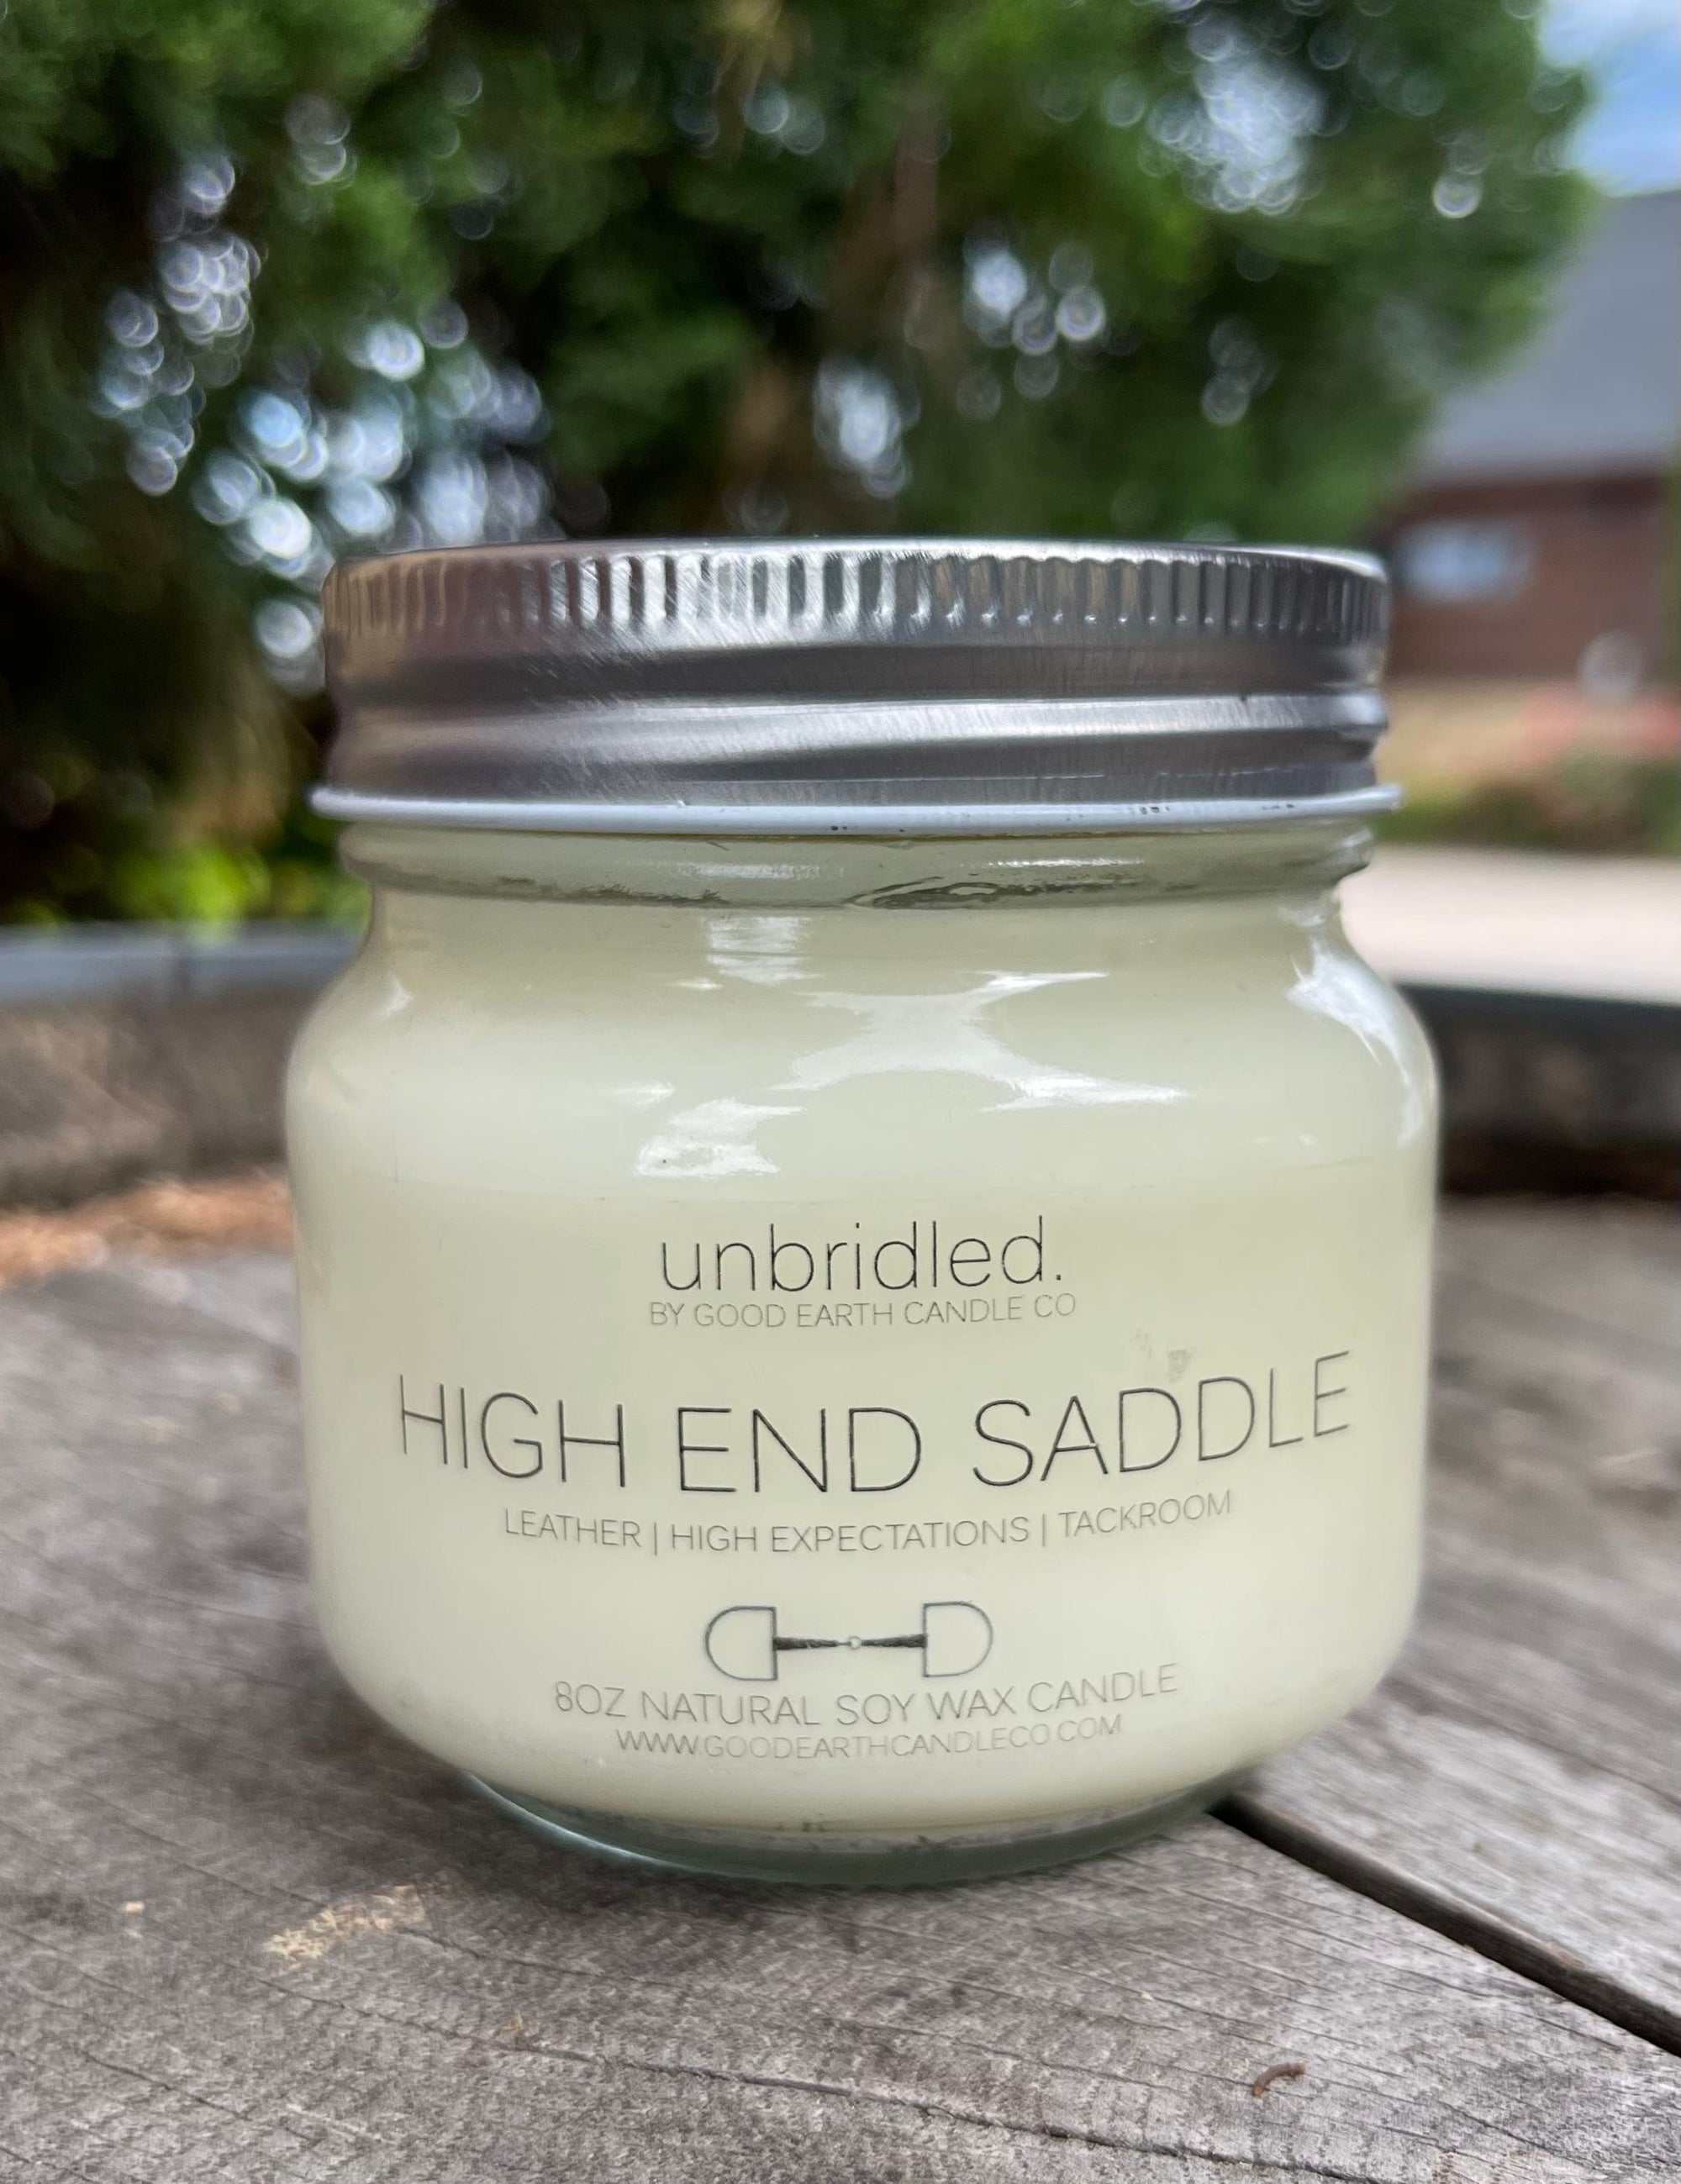 Good Earth Good Earth Candle - High End Saddle equestrian team apparel online tack store mobile tack store custom farm apparel custom show stable clothing equestrian lifestyle horse show clothing riding clothes horses equestrian tack store